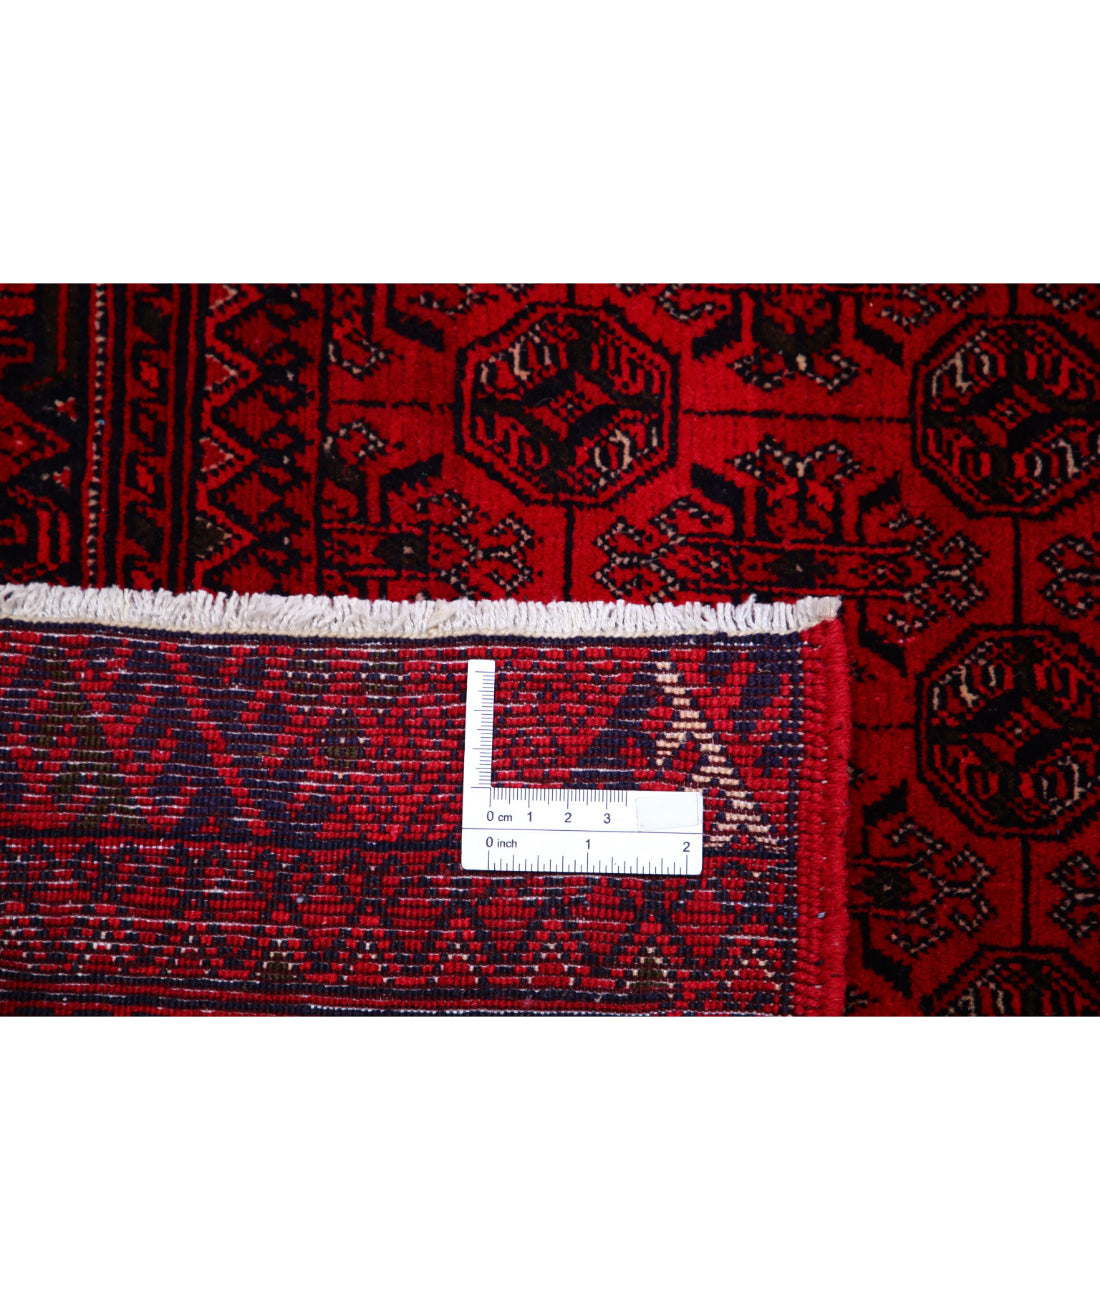 Hand Knotted Afghan Beljik Wool Rug - 6'5'' x 9'5'' 6'5'' x 9'5'' (193 X 283) / Red / Red